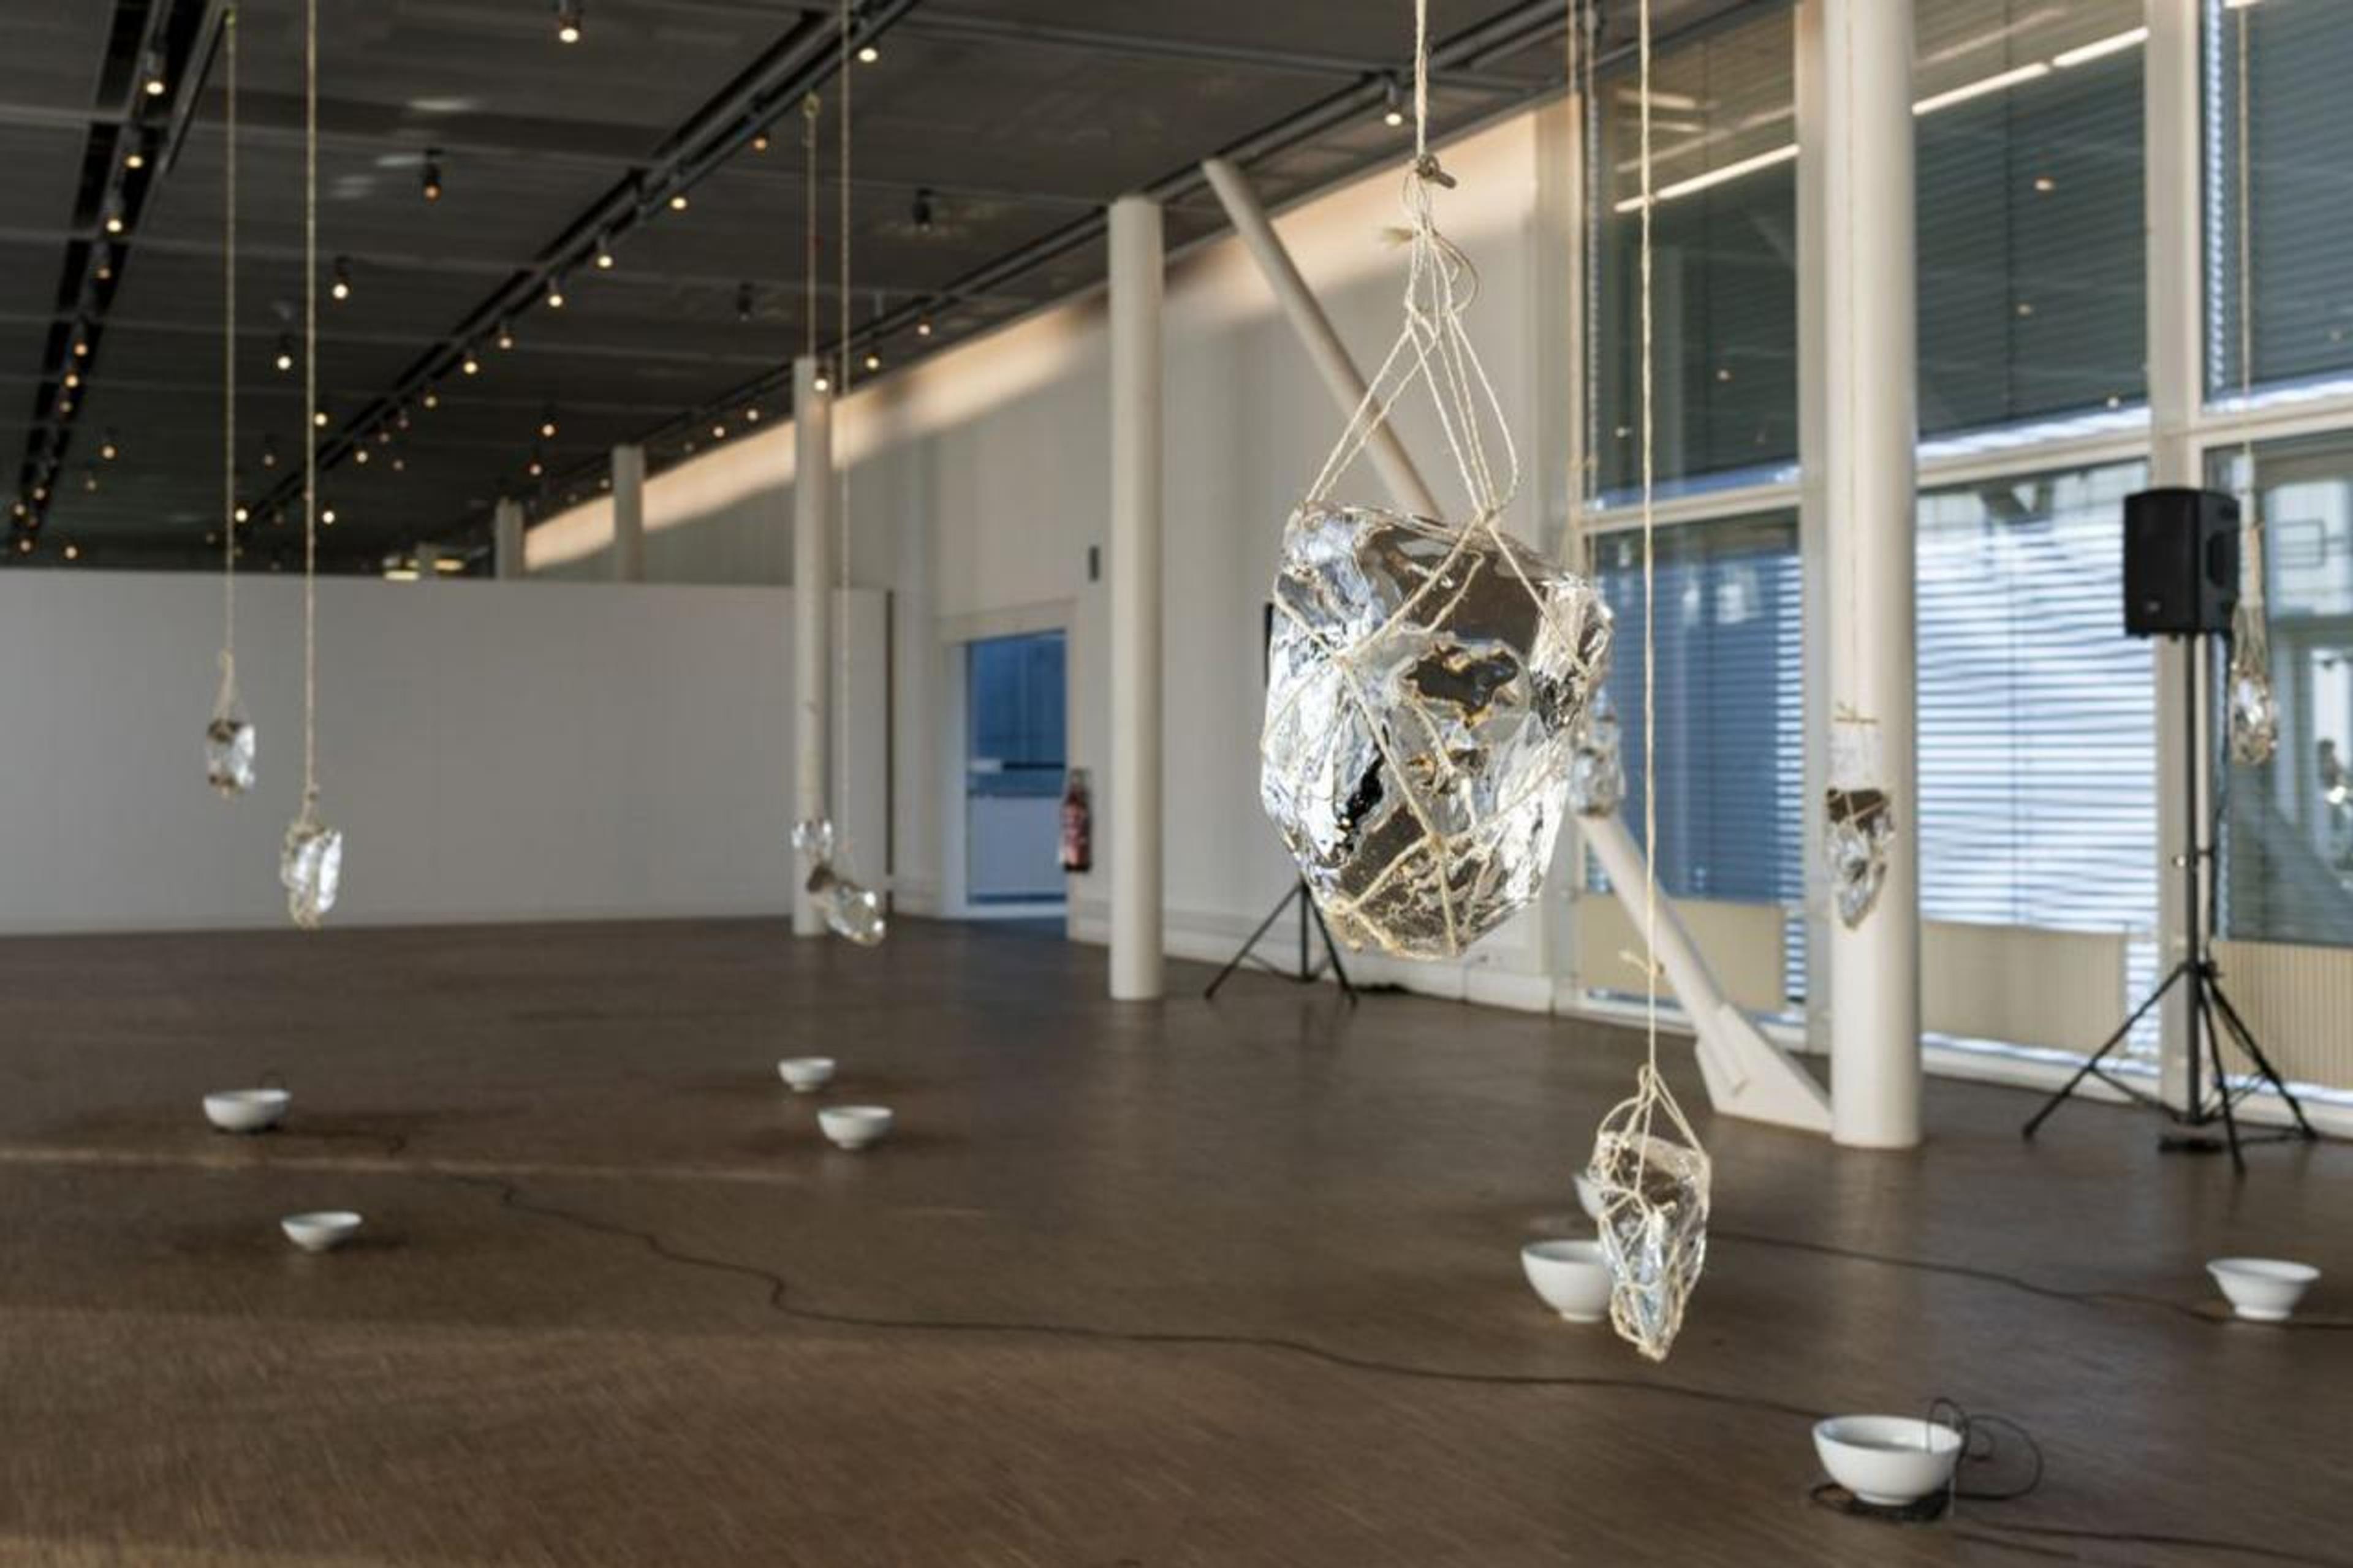 Tomoko Sauvage, In Curved Water, 2010, ice, porcelain bowls, water, ropes, hydrophones, sound system, dimensions variable